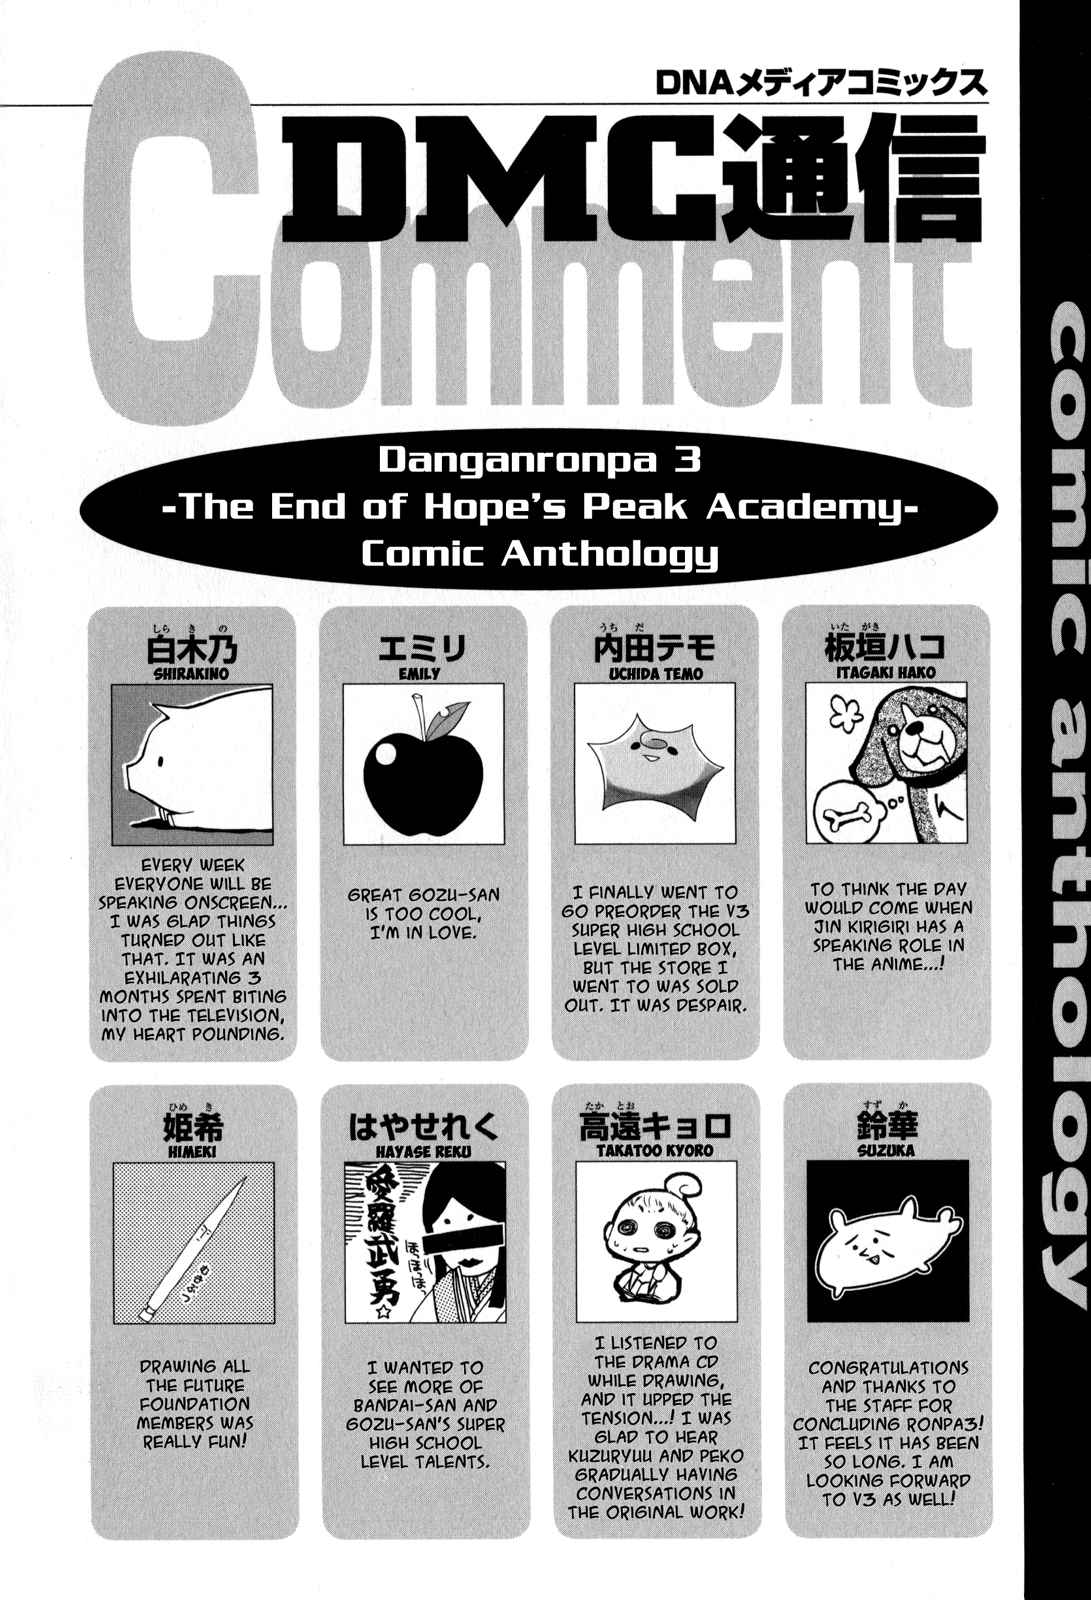 Danganronpa 3: The End of Hope's Peak Academy Future Arc & Despair Arc Comic Anthology (DNA Media) Vol. 1 Ch. 15 The Despair of Something That Became Possible by Risume (End)